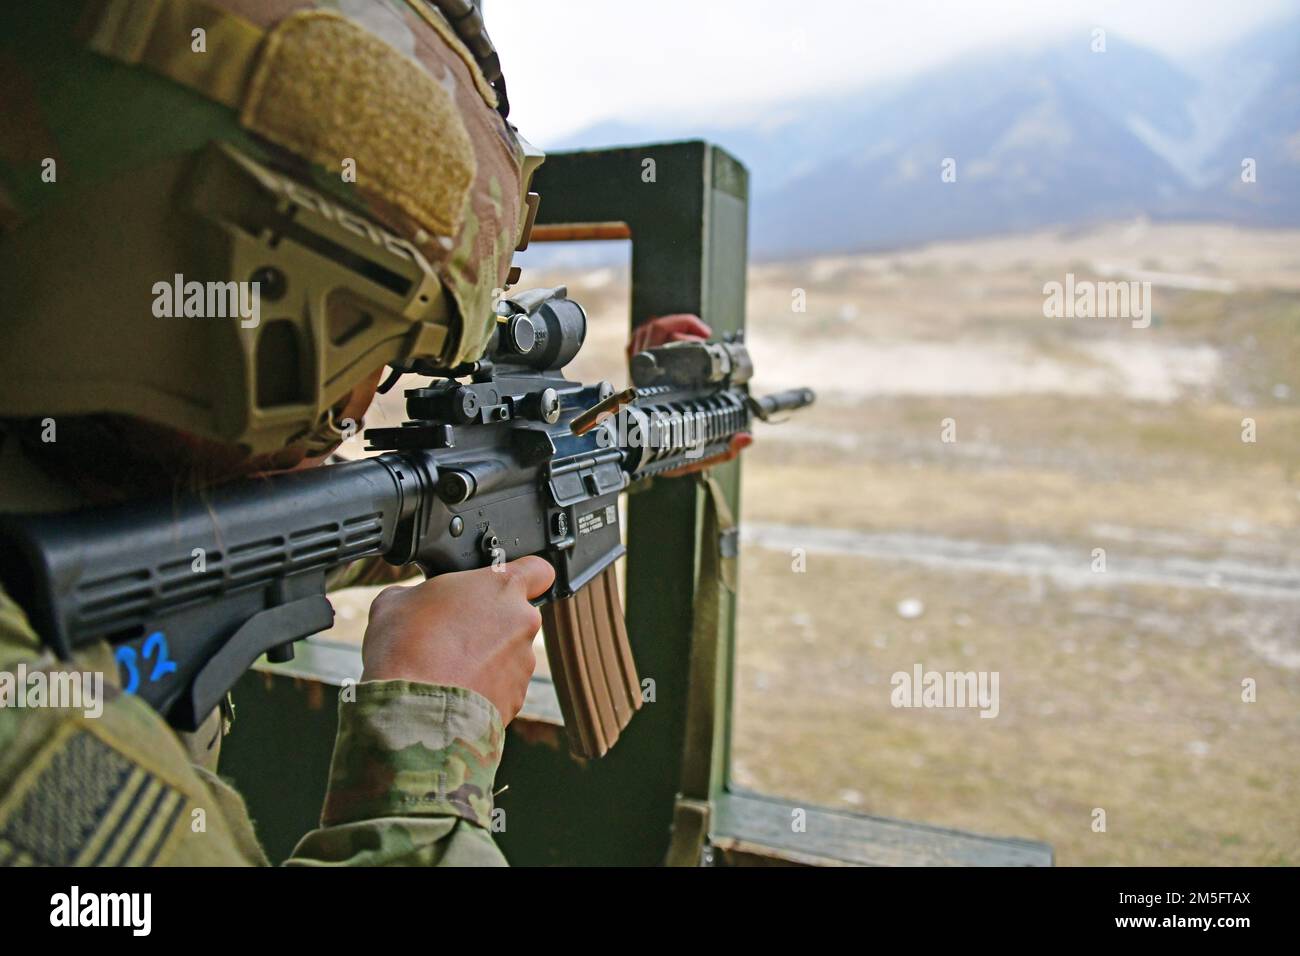 U.S. Army Pfc. Meggan A. Muzquiz, Paratrooper assigned to the 2nd Battalion, 503rd Infantry Regiment, 173rd Airborne Brigade, engages a pop-up targets with  an M4 carbine during marksmanship training at Cao Malnisio Range, Pordenone, Italy, March 15, 2022. The 173rd Airborne Brigade is the U.S. Army’s Contingency Response Force in Europe, providing rapidly deployable forces to United States European, African, and Central Command areas of responsibility. Stock Photo